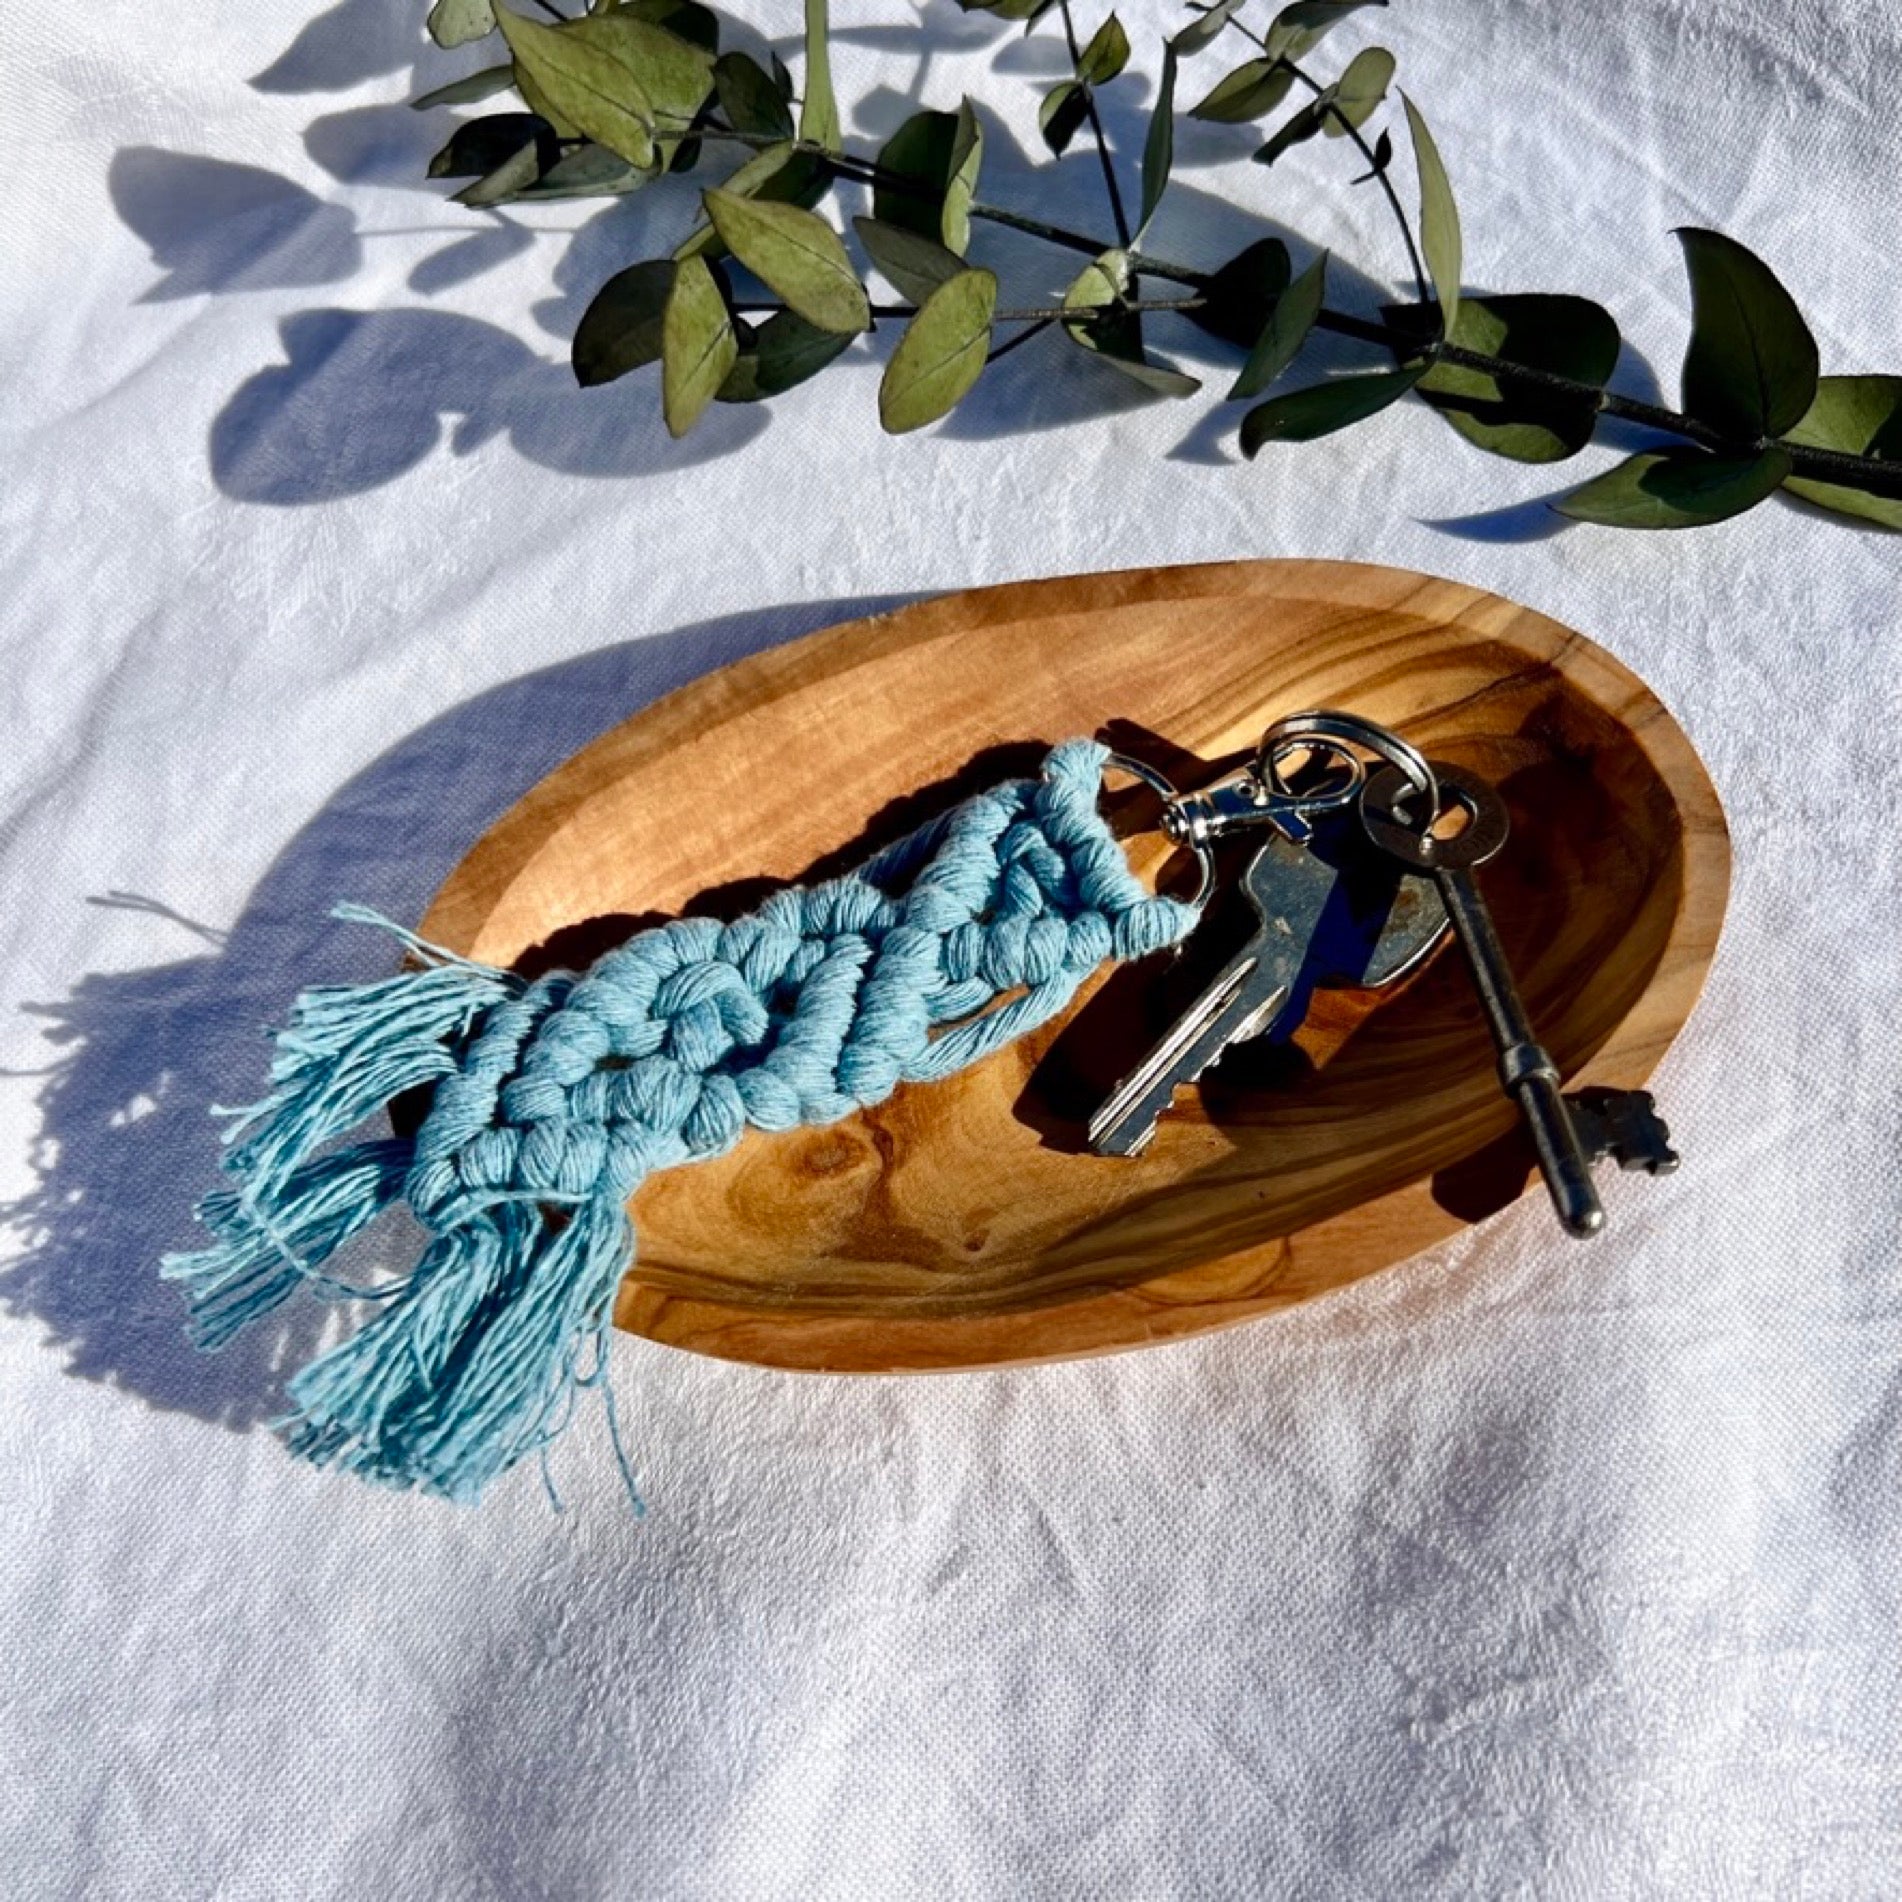 A blue macrame keyring sits in a honey coloured olive wood bowl